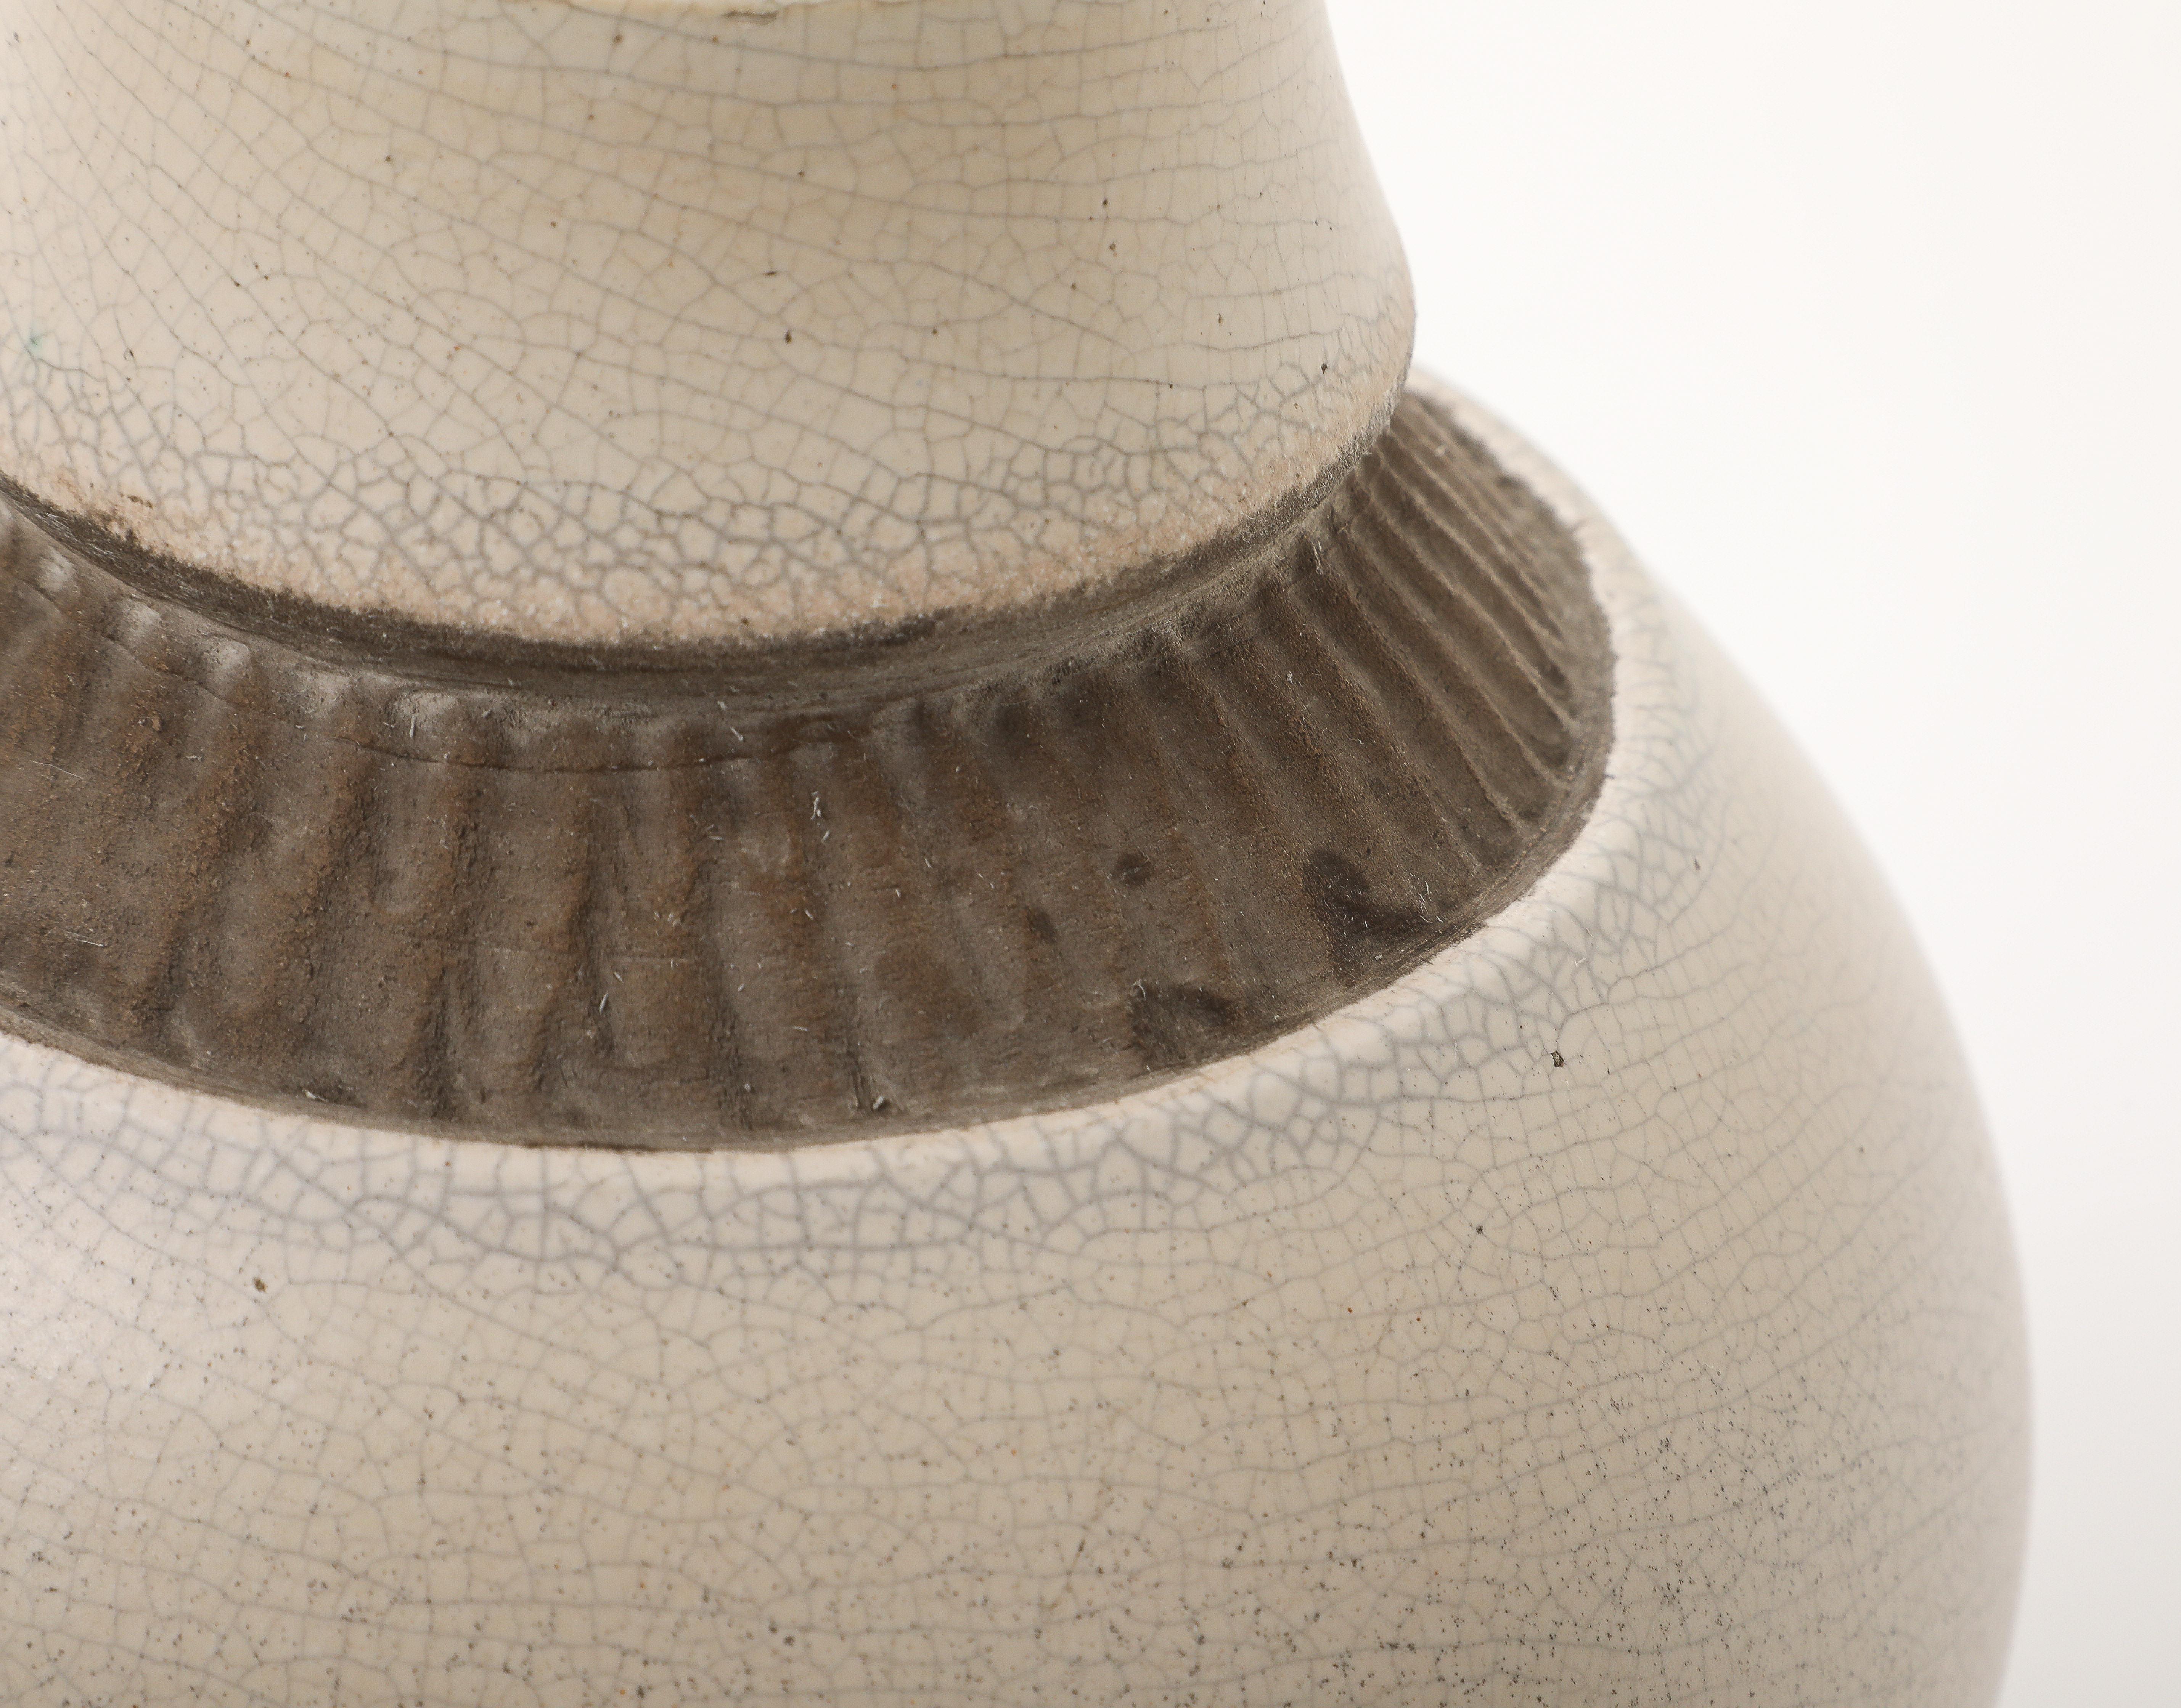 Pol Chambost Off-White Crackle Vase, Brown Incised Bands, Frankreich, 1940, signiert im Angebot 1